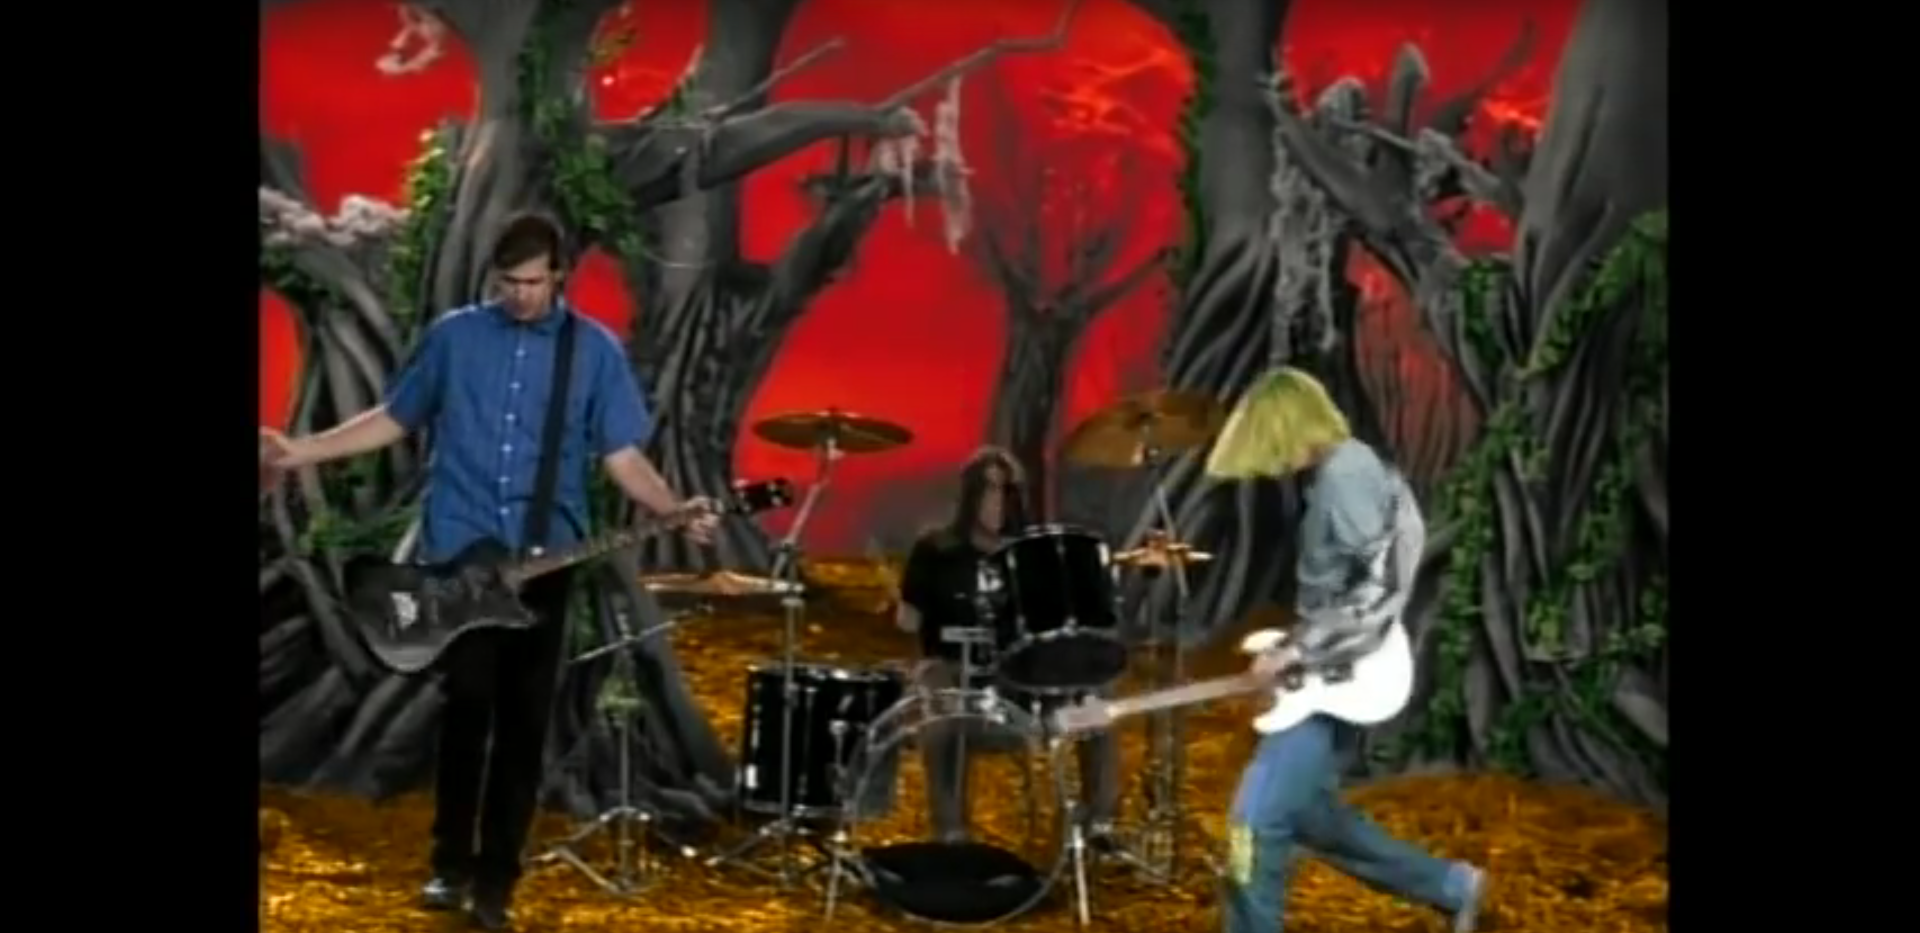 Can someone explain to me what's the meaning of KKK girl in Heart-Shaped  box video? : r/Nirvana